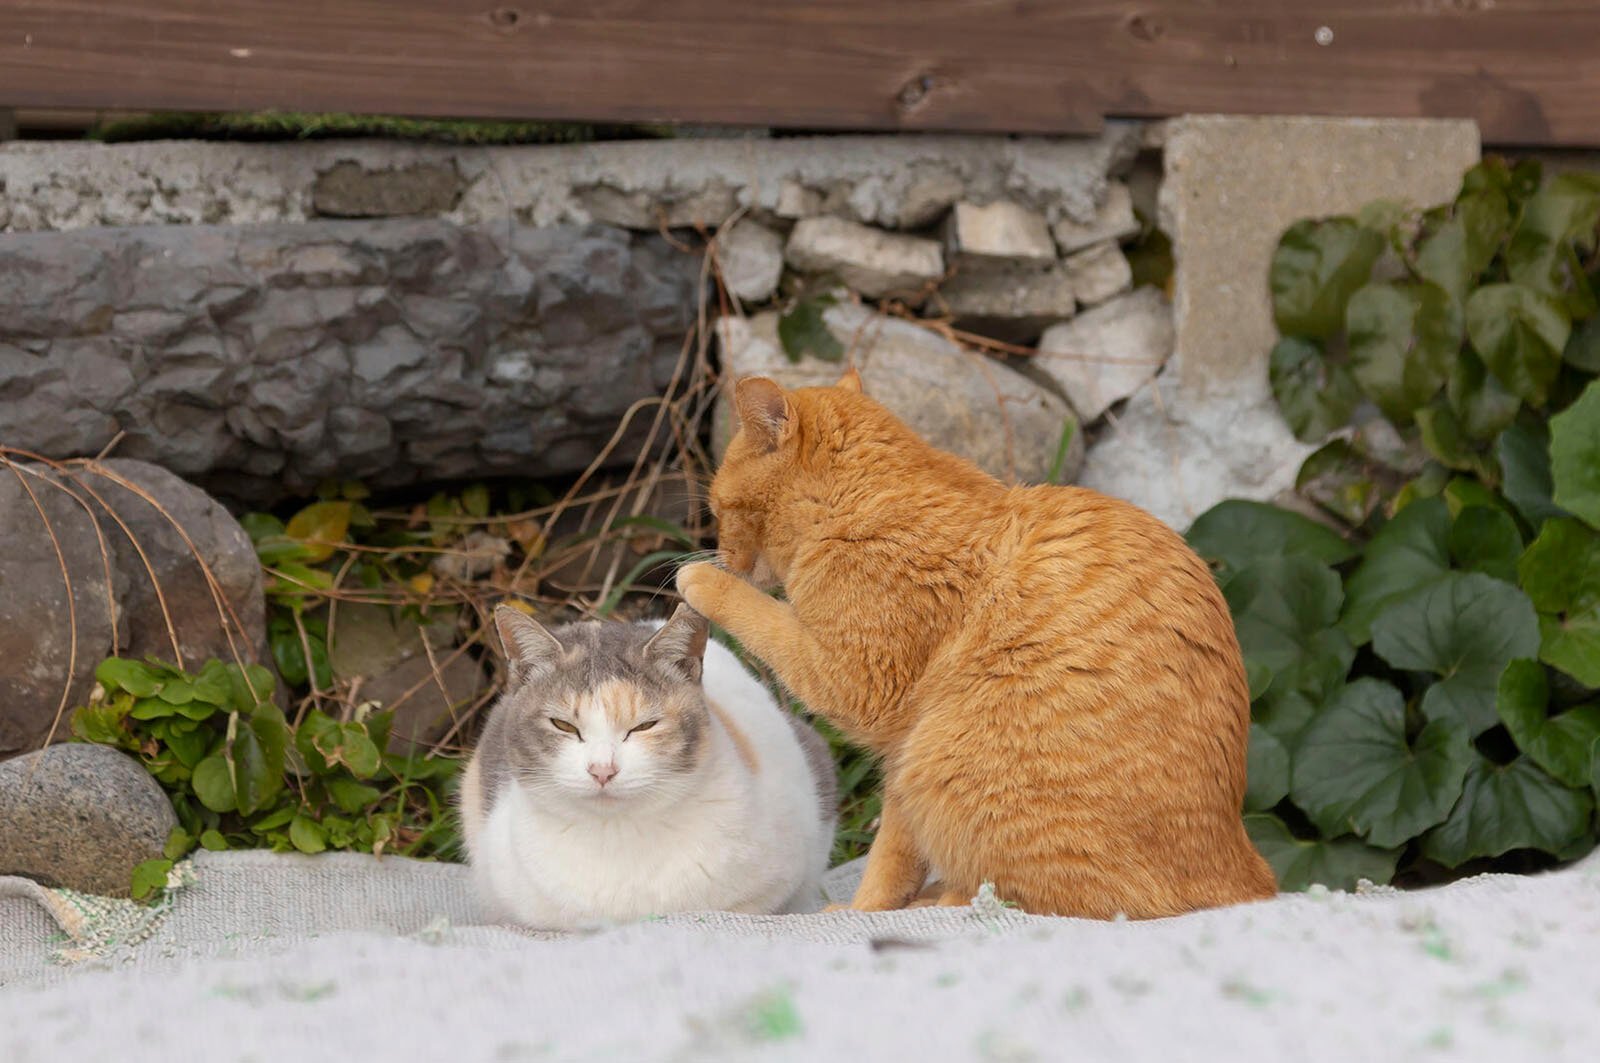 Two cats outdoors; an orange cat grooms the head of a white and gray cat sitting in a sand pit surrounded by rocks and green foliage.